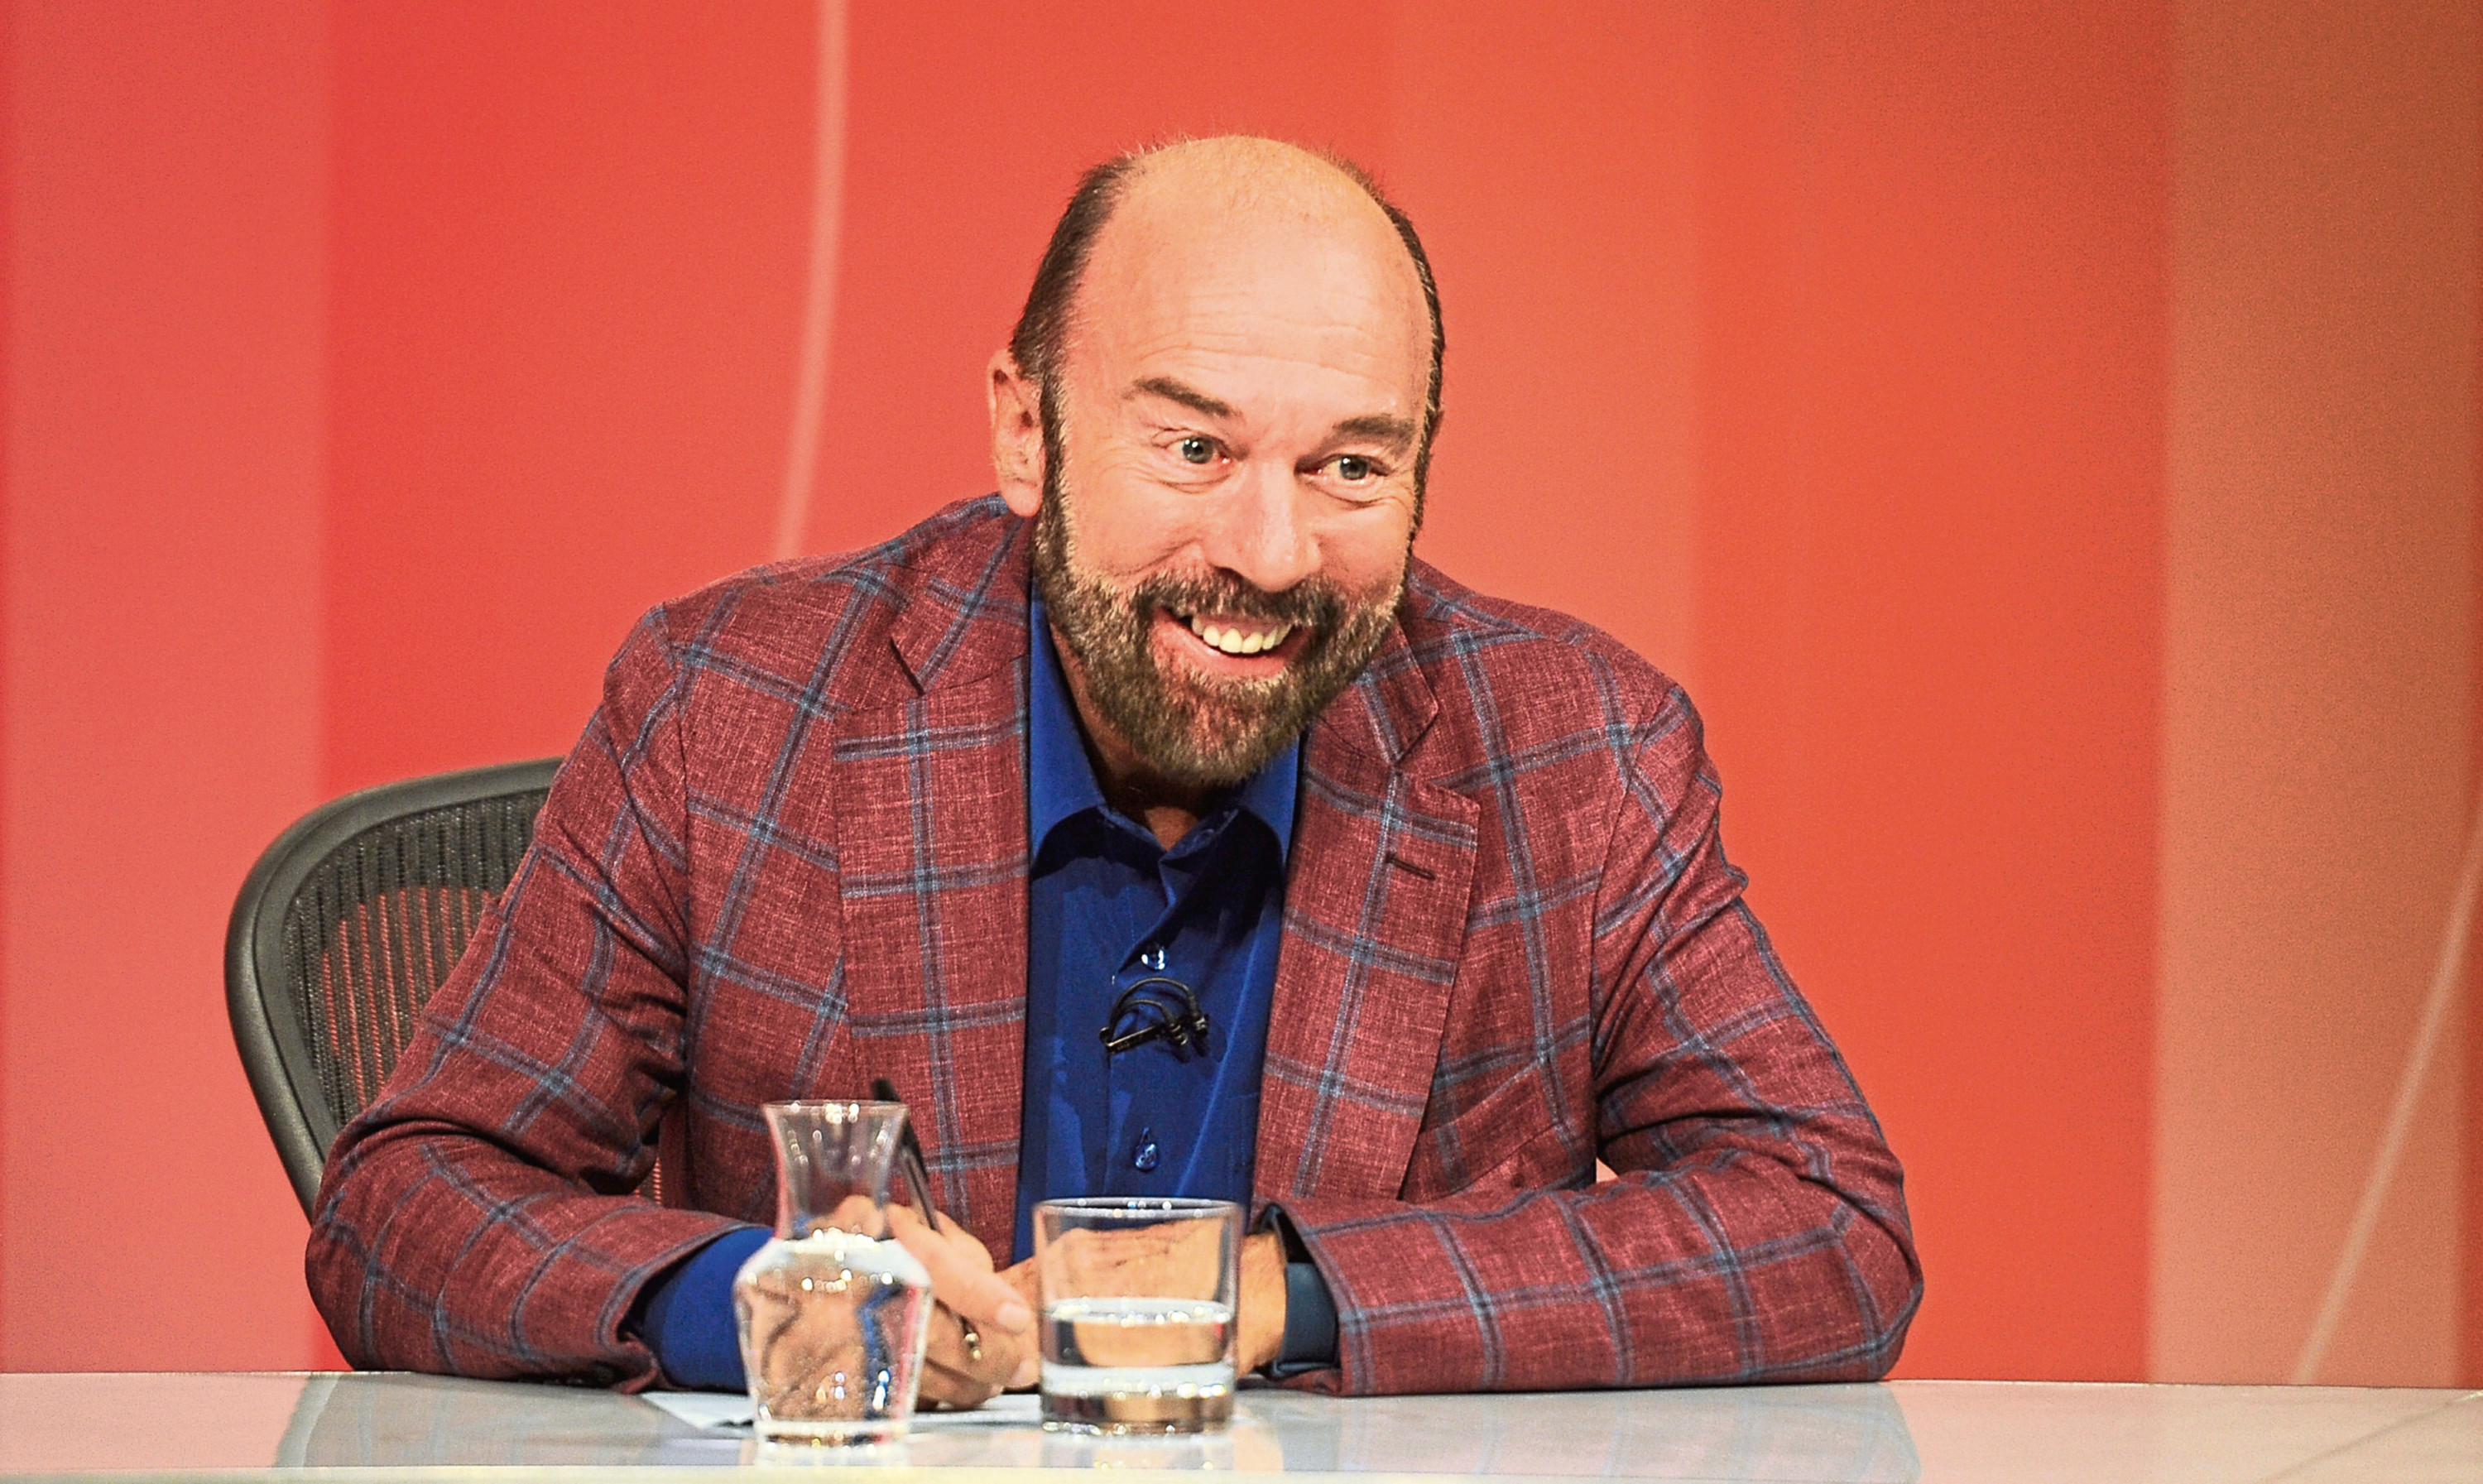 Stagecoach co-founder Sir Brian Souter